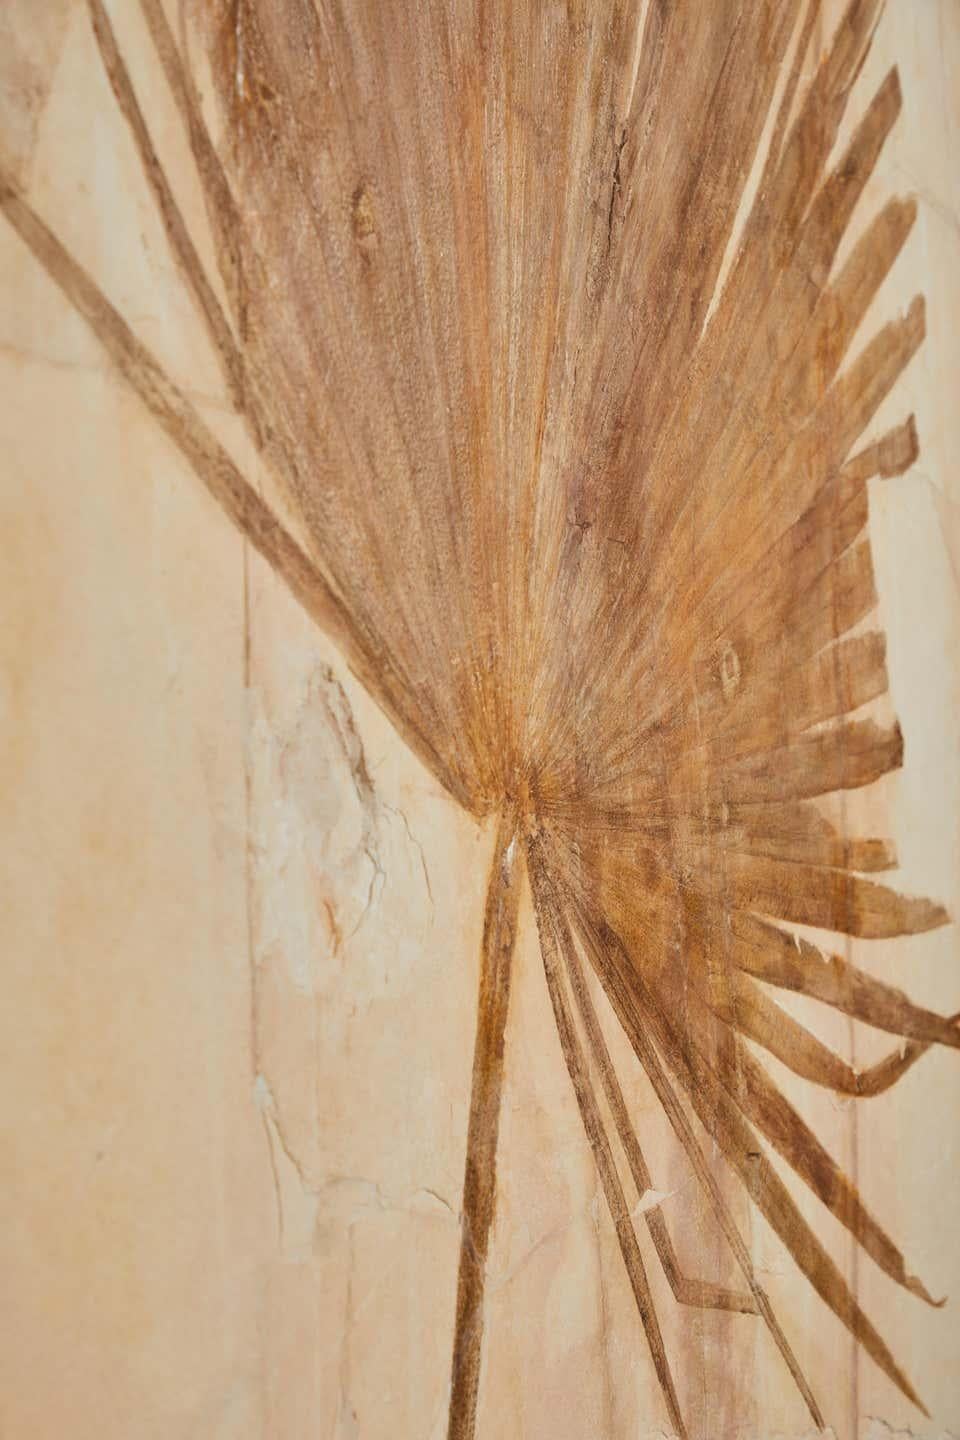 Organic Material 50 Million Year Old Eocene Era Fossil Palm Frond Mural in Stone, from Wyoming